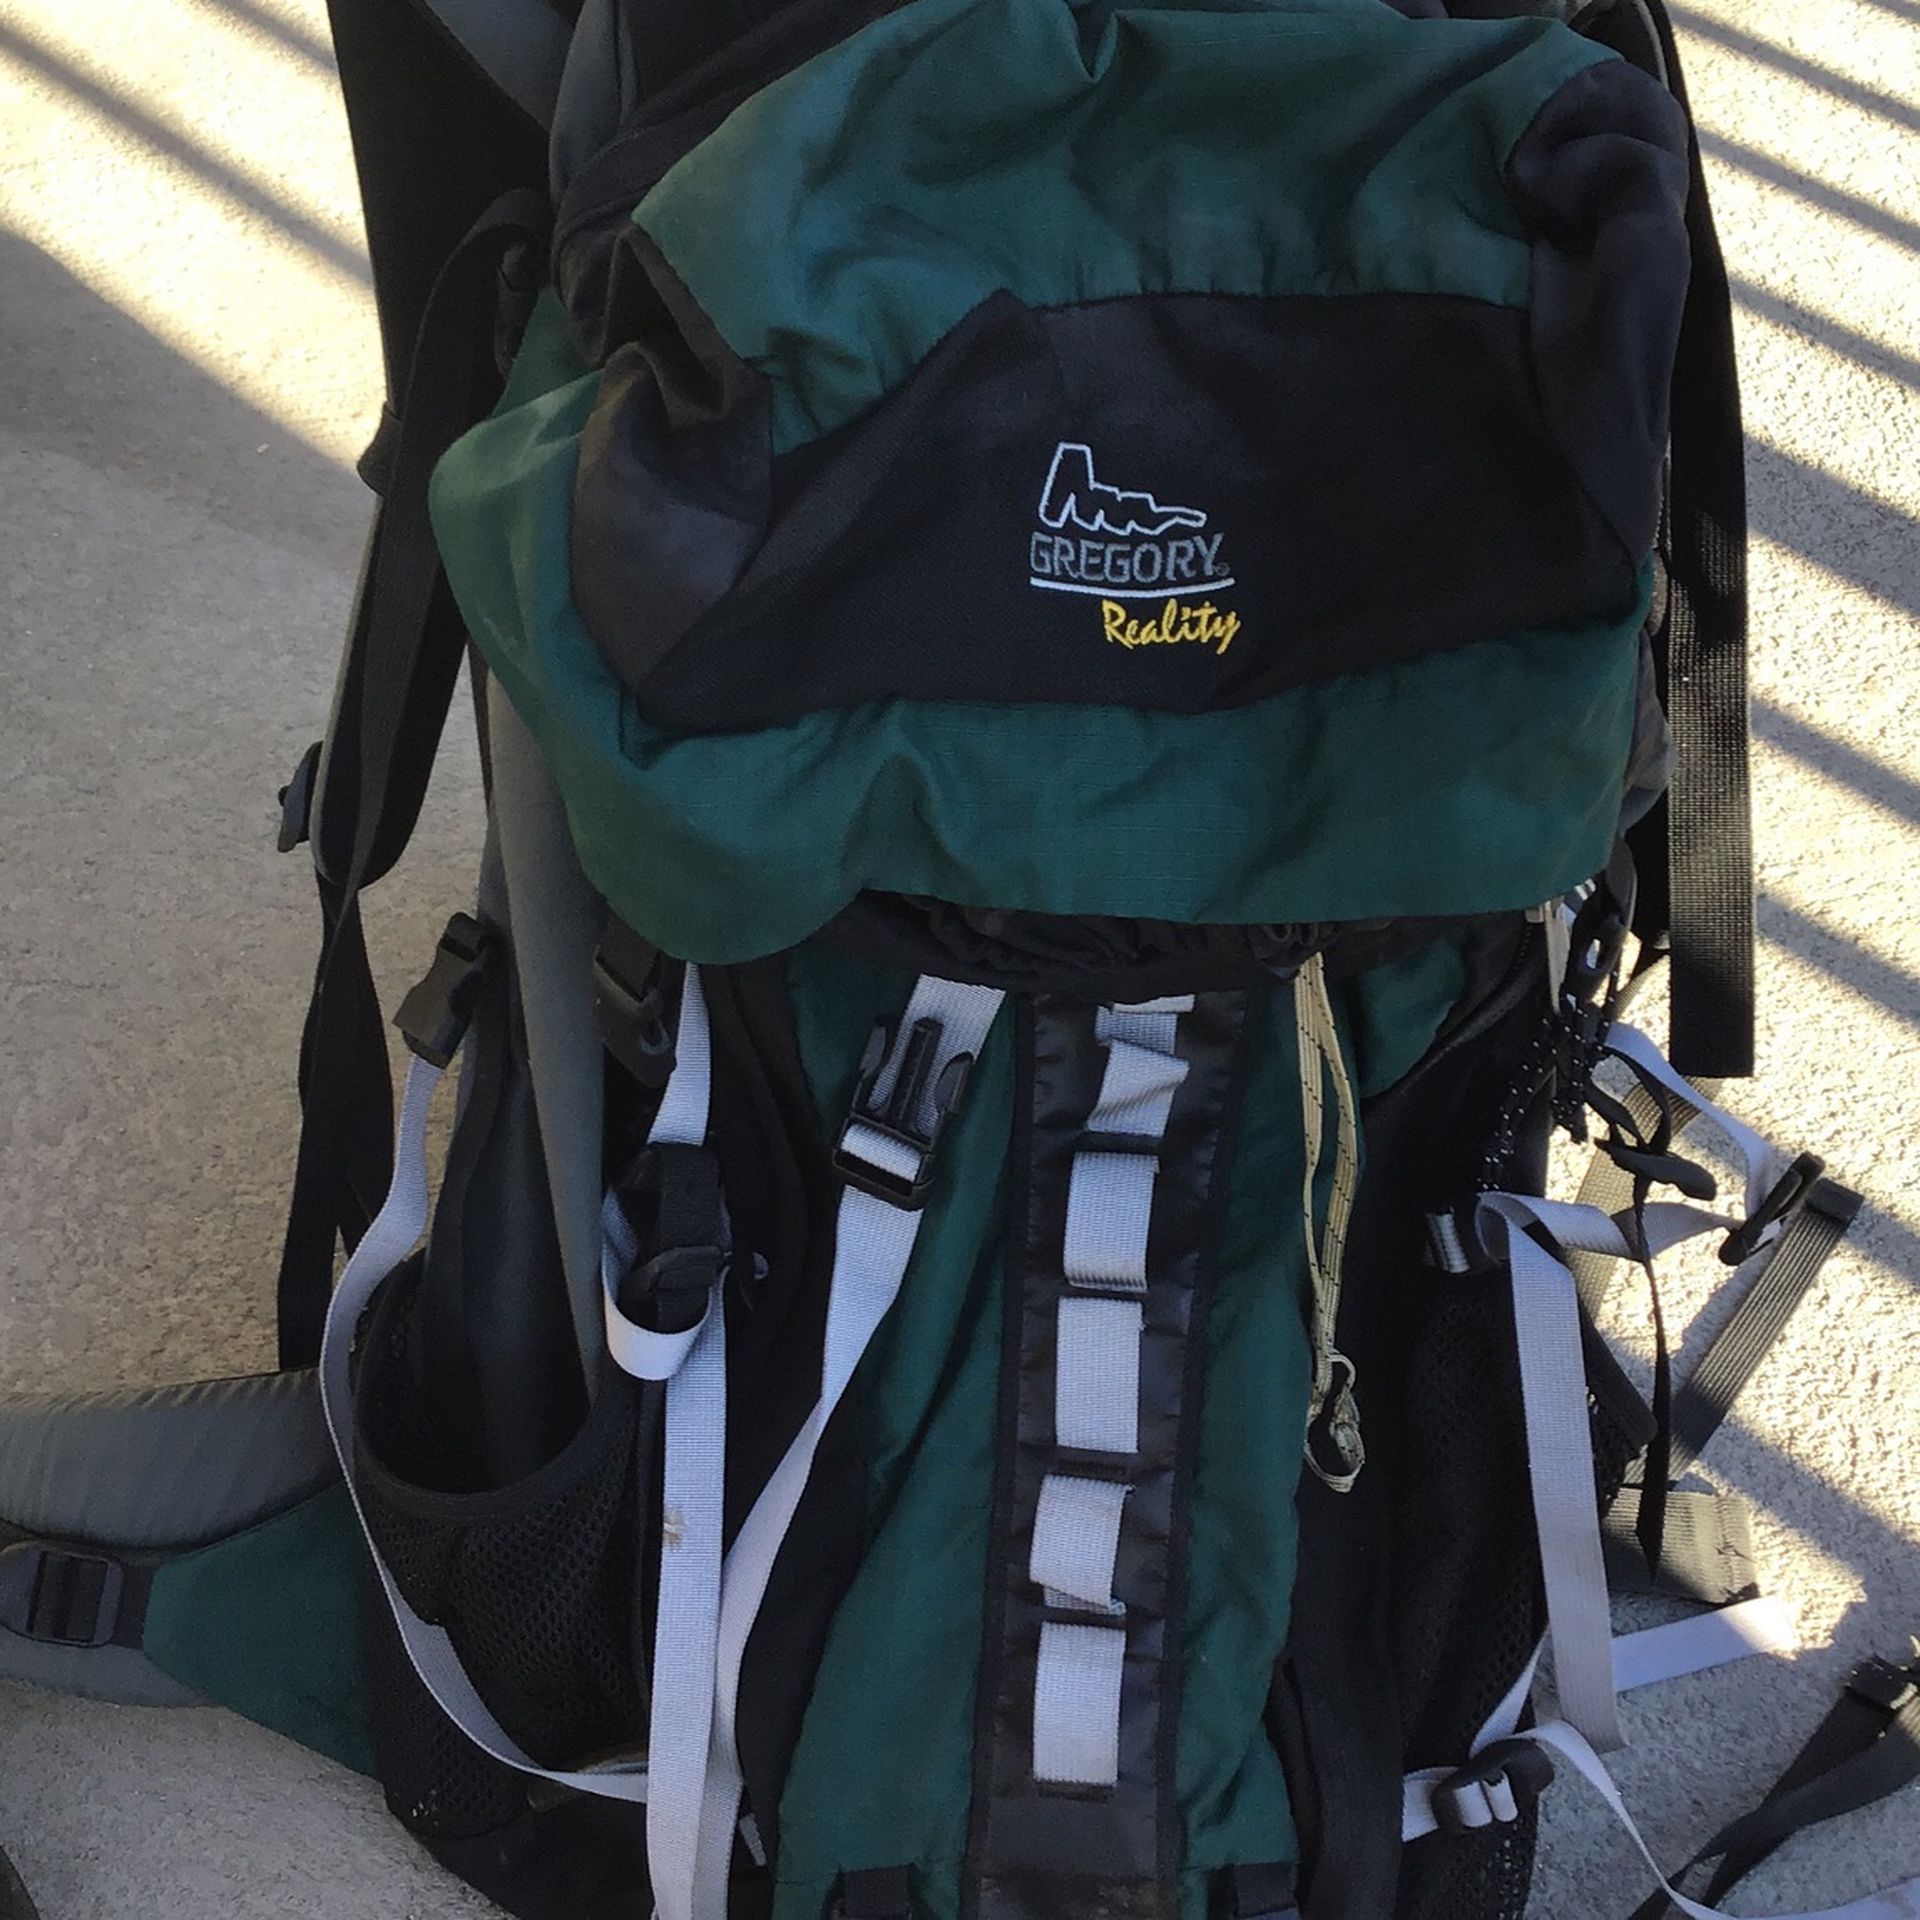 Gregory Reality Backpack. Dark Green And Black. Internal Frame. Says Size Large. My 6 Foot Son Used It For A 5 Day PCT Trip. Worked Fine